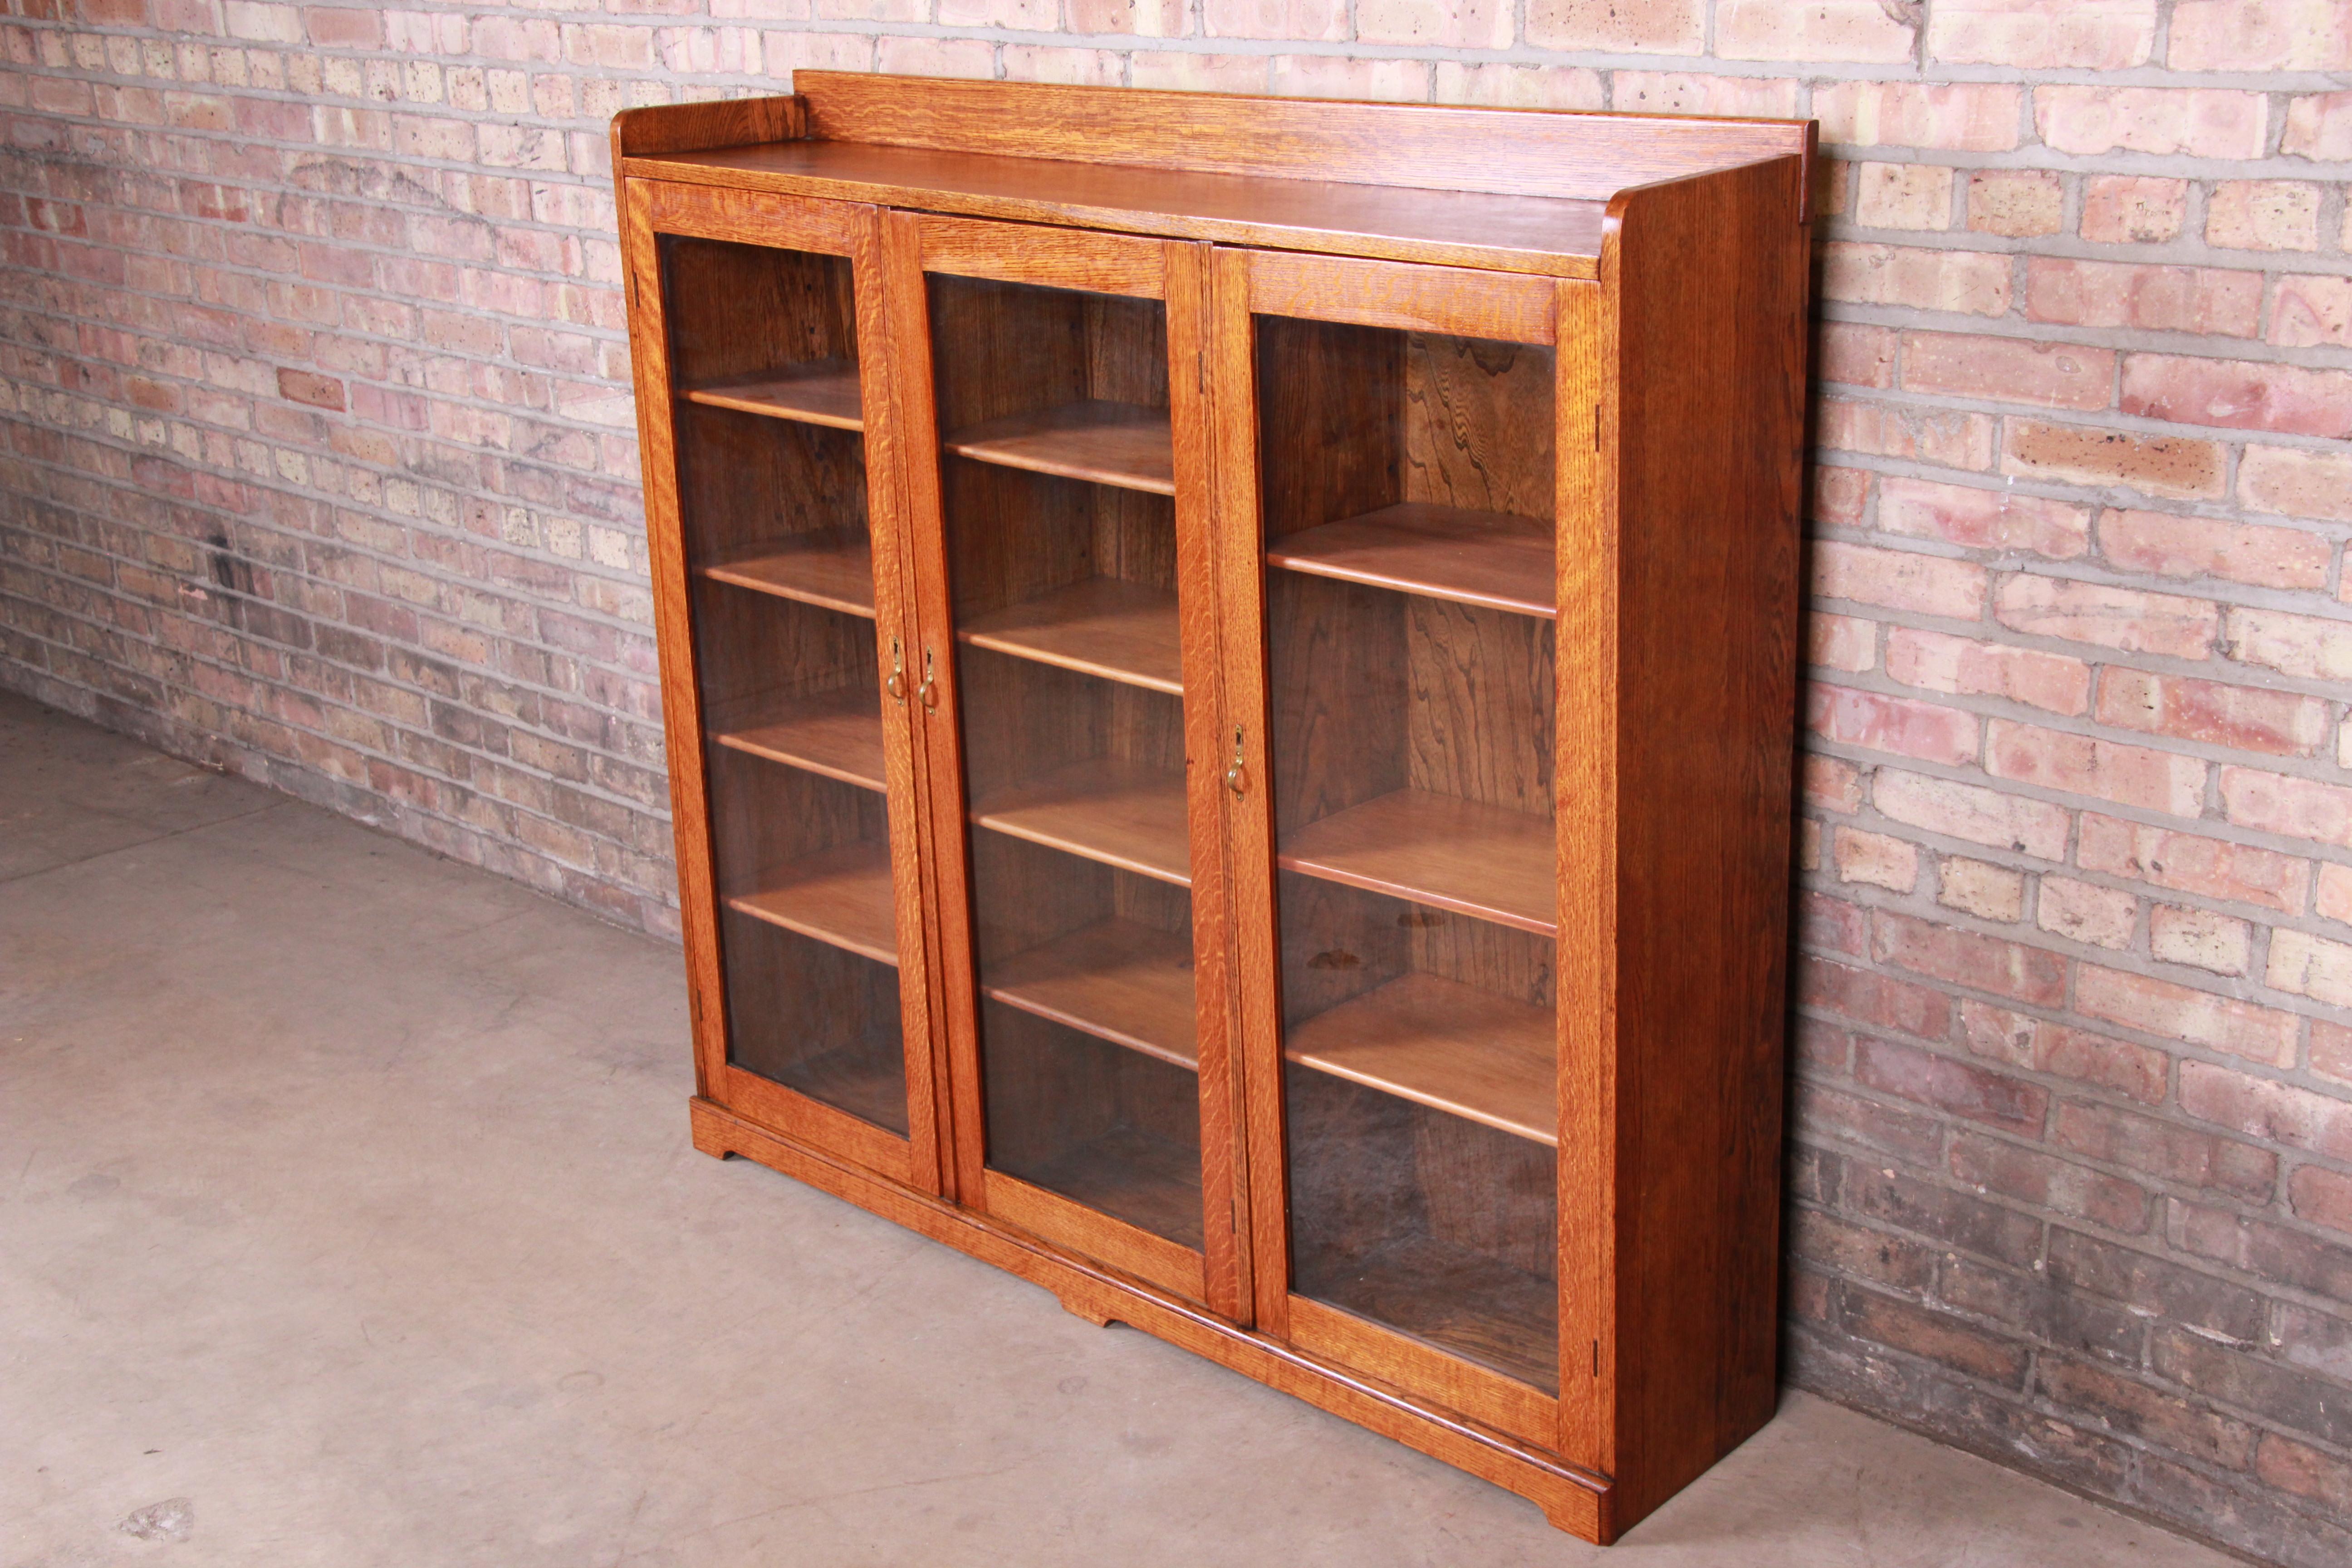 A beautiful Arts & Crafts solid quarter sawn oak glass front triple bookcase

USA, circa 1900

Solid oak, with glass front doors and brass hardware.

Measures: 54.13